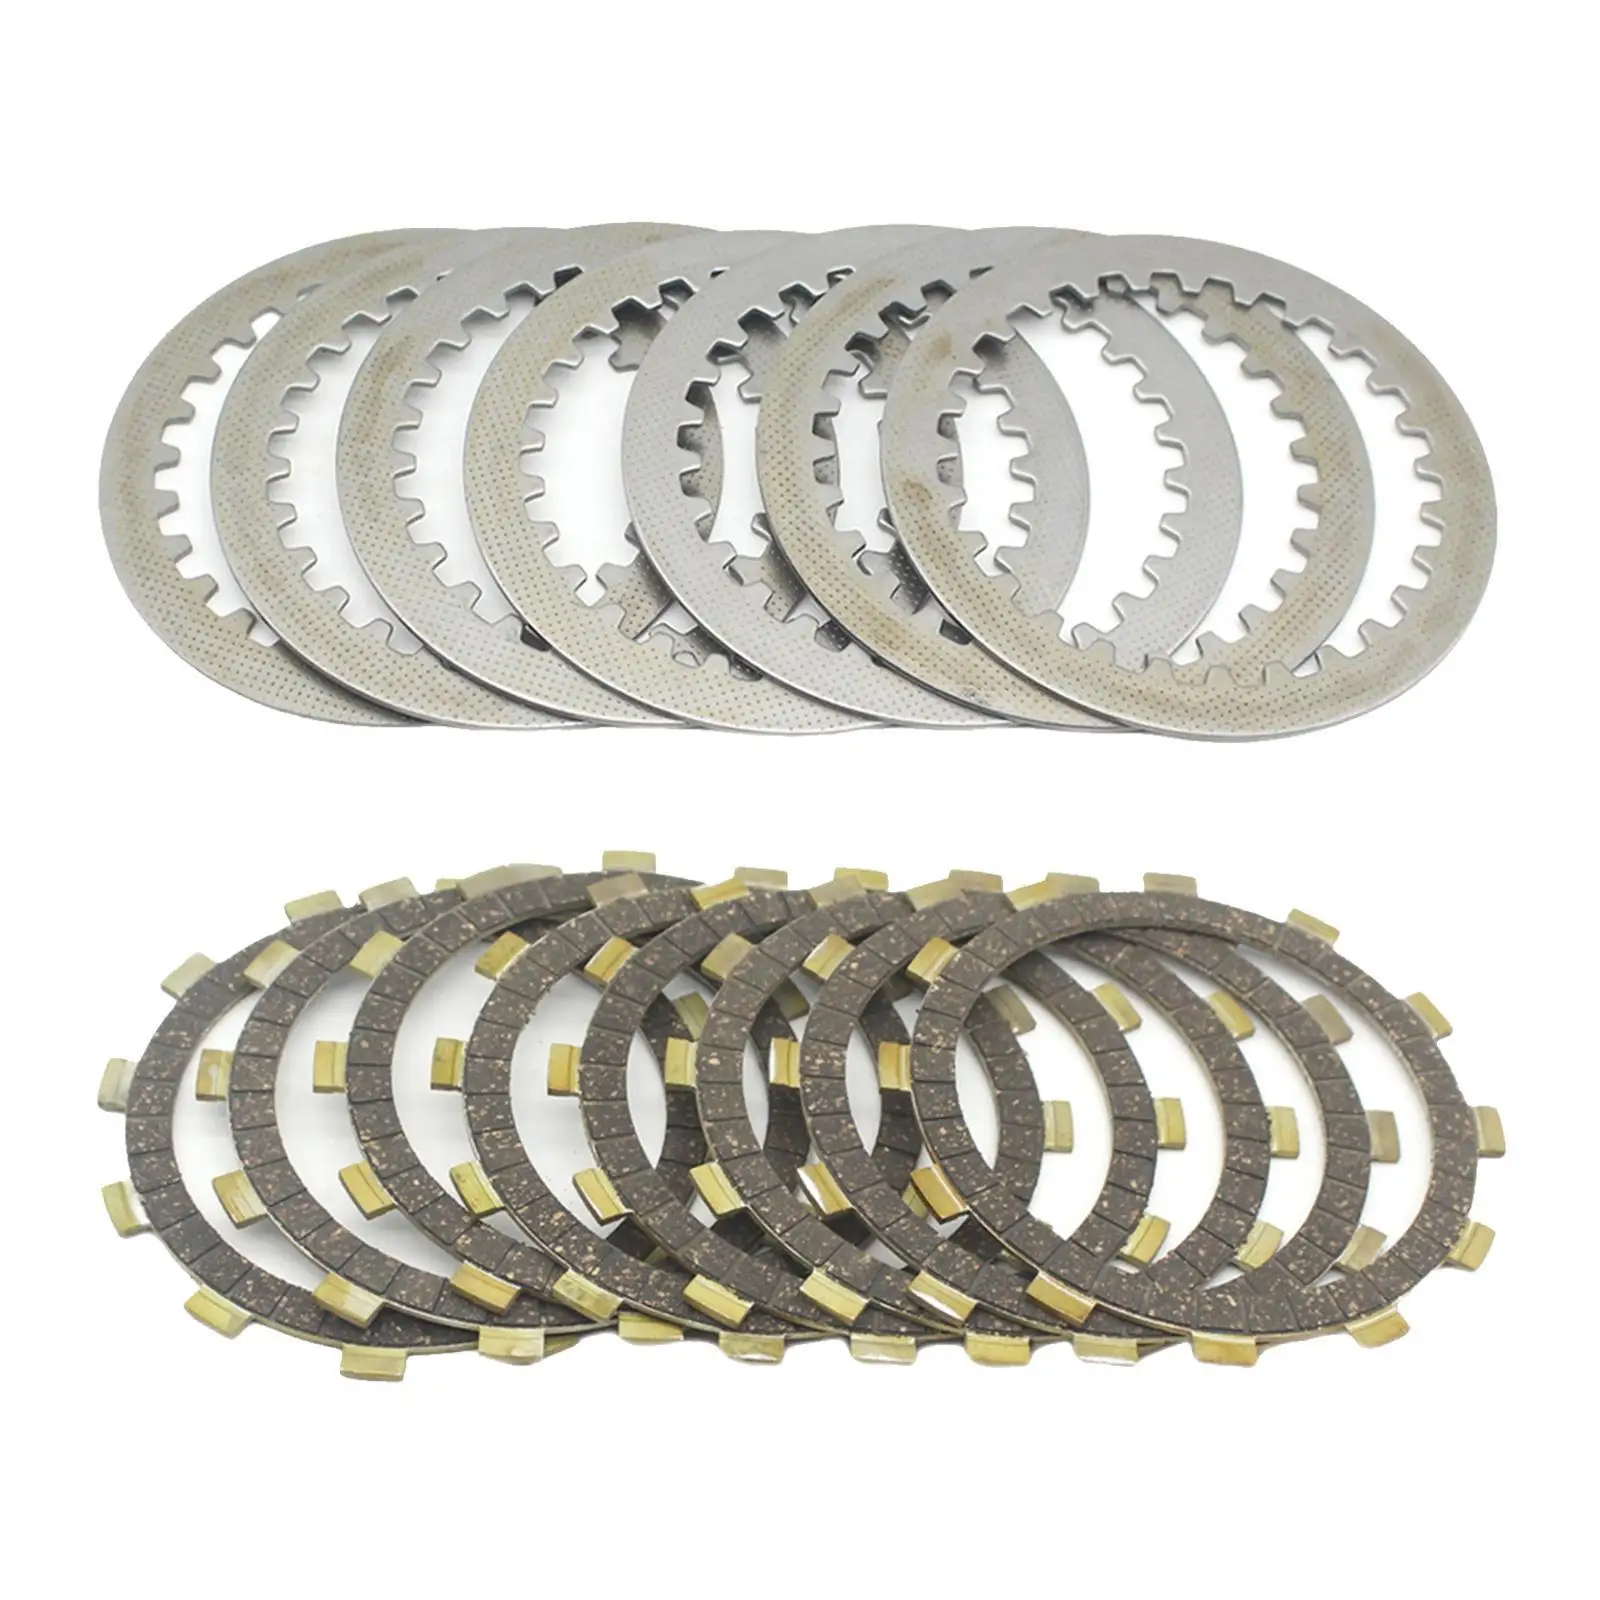 Clutch Friction Plates Disc  for XJR400 4HM FZ600 XJ650 Motocross ATV Outdoor 4H7-16321-01 4H7-16321-02 8 168-16325-00